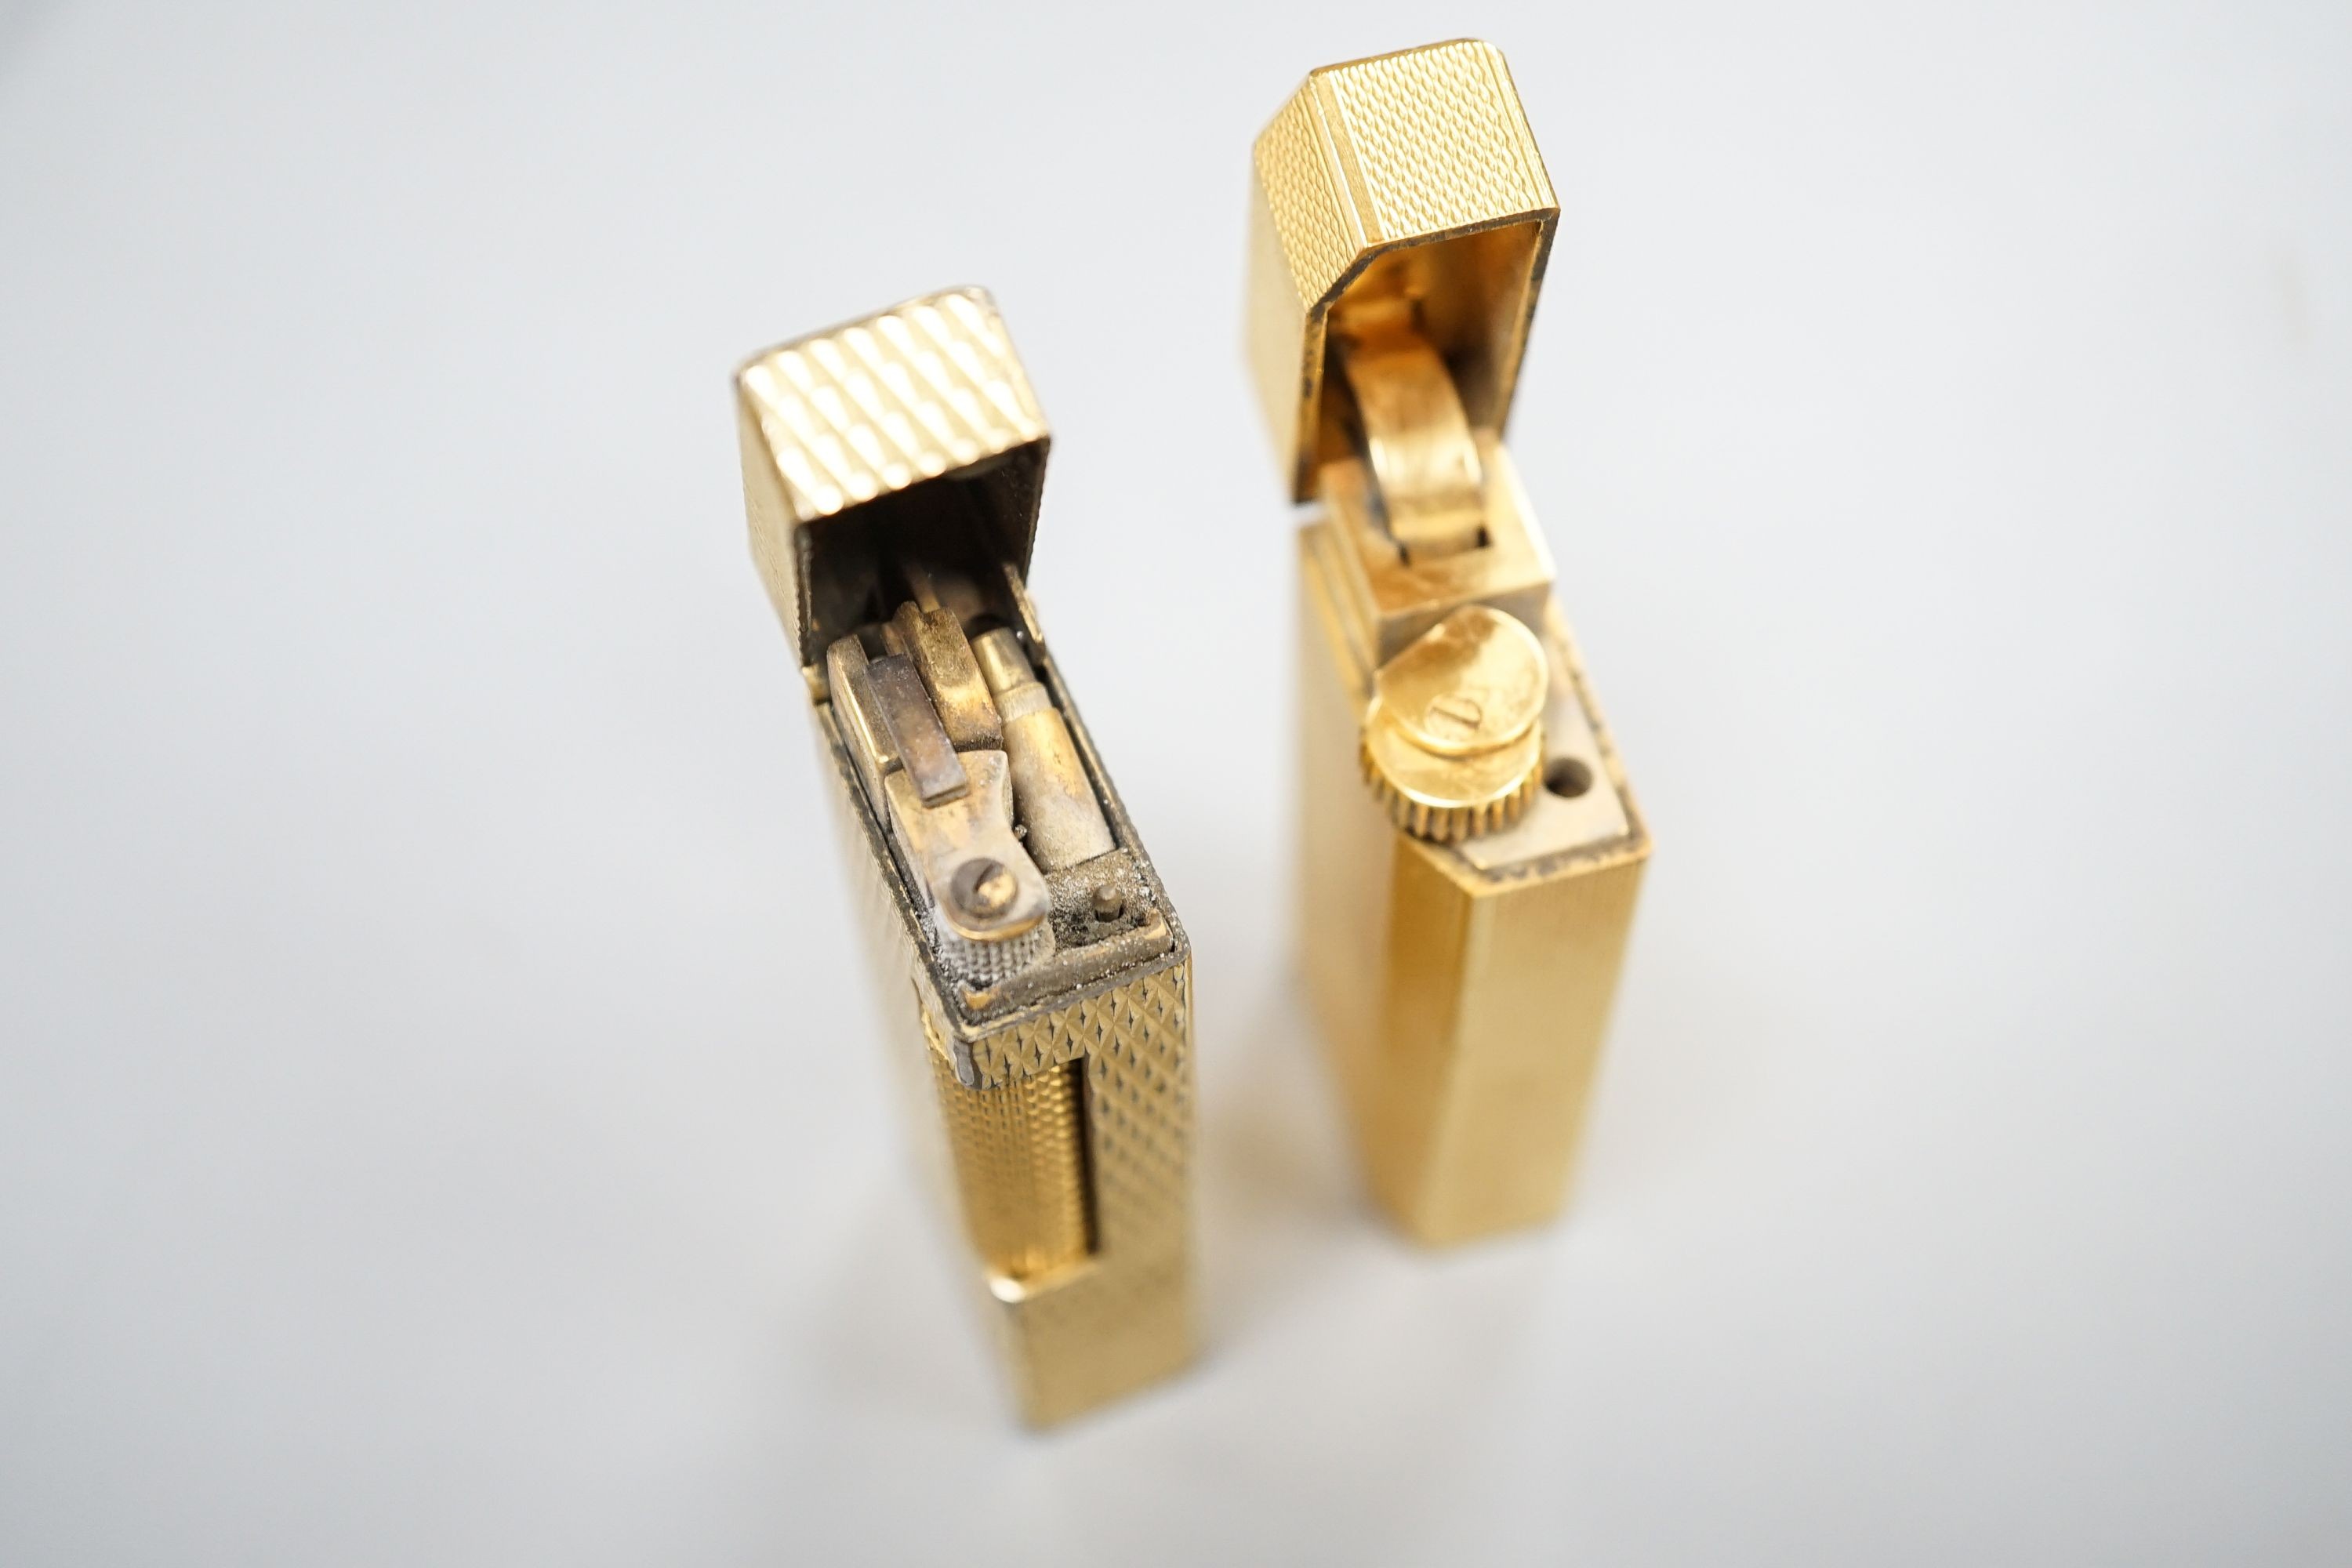 A gold plated Cartier lighter and a similar Dupont lighter